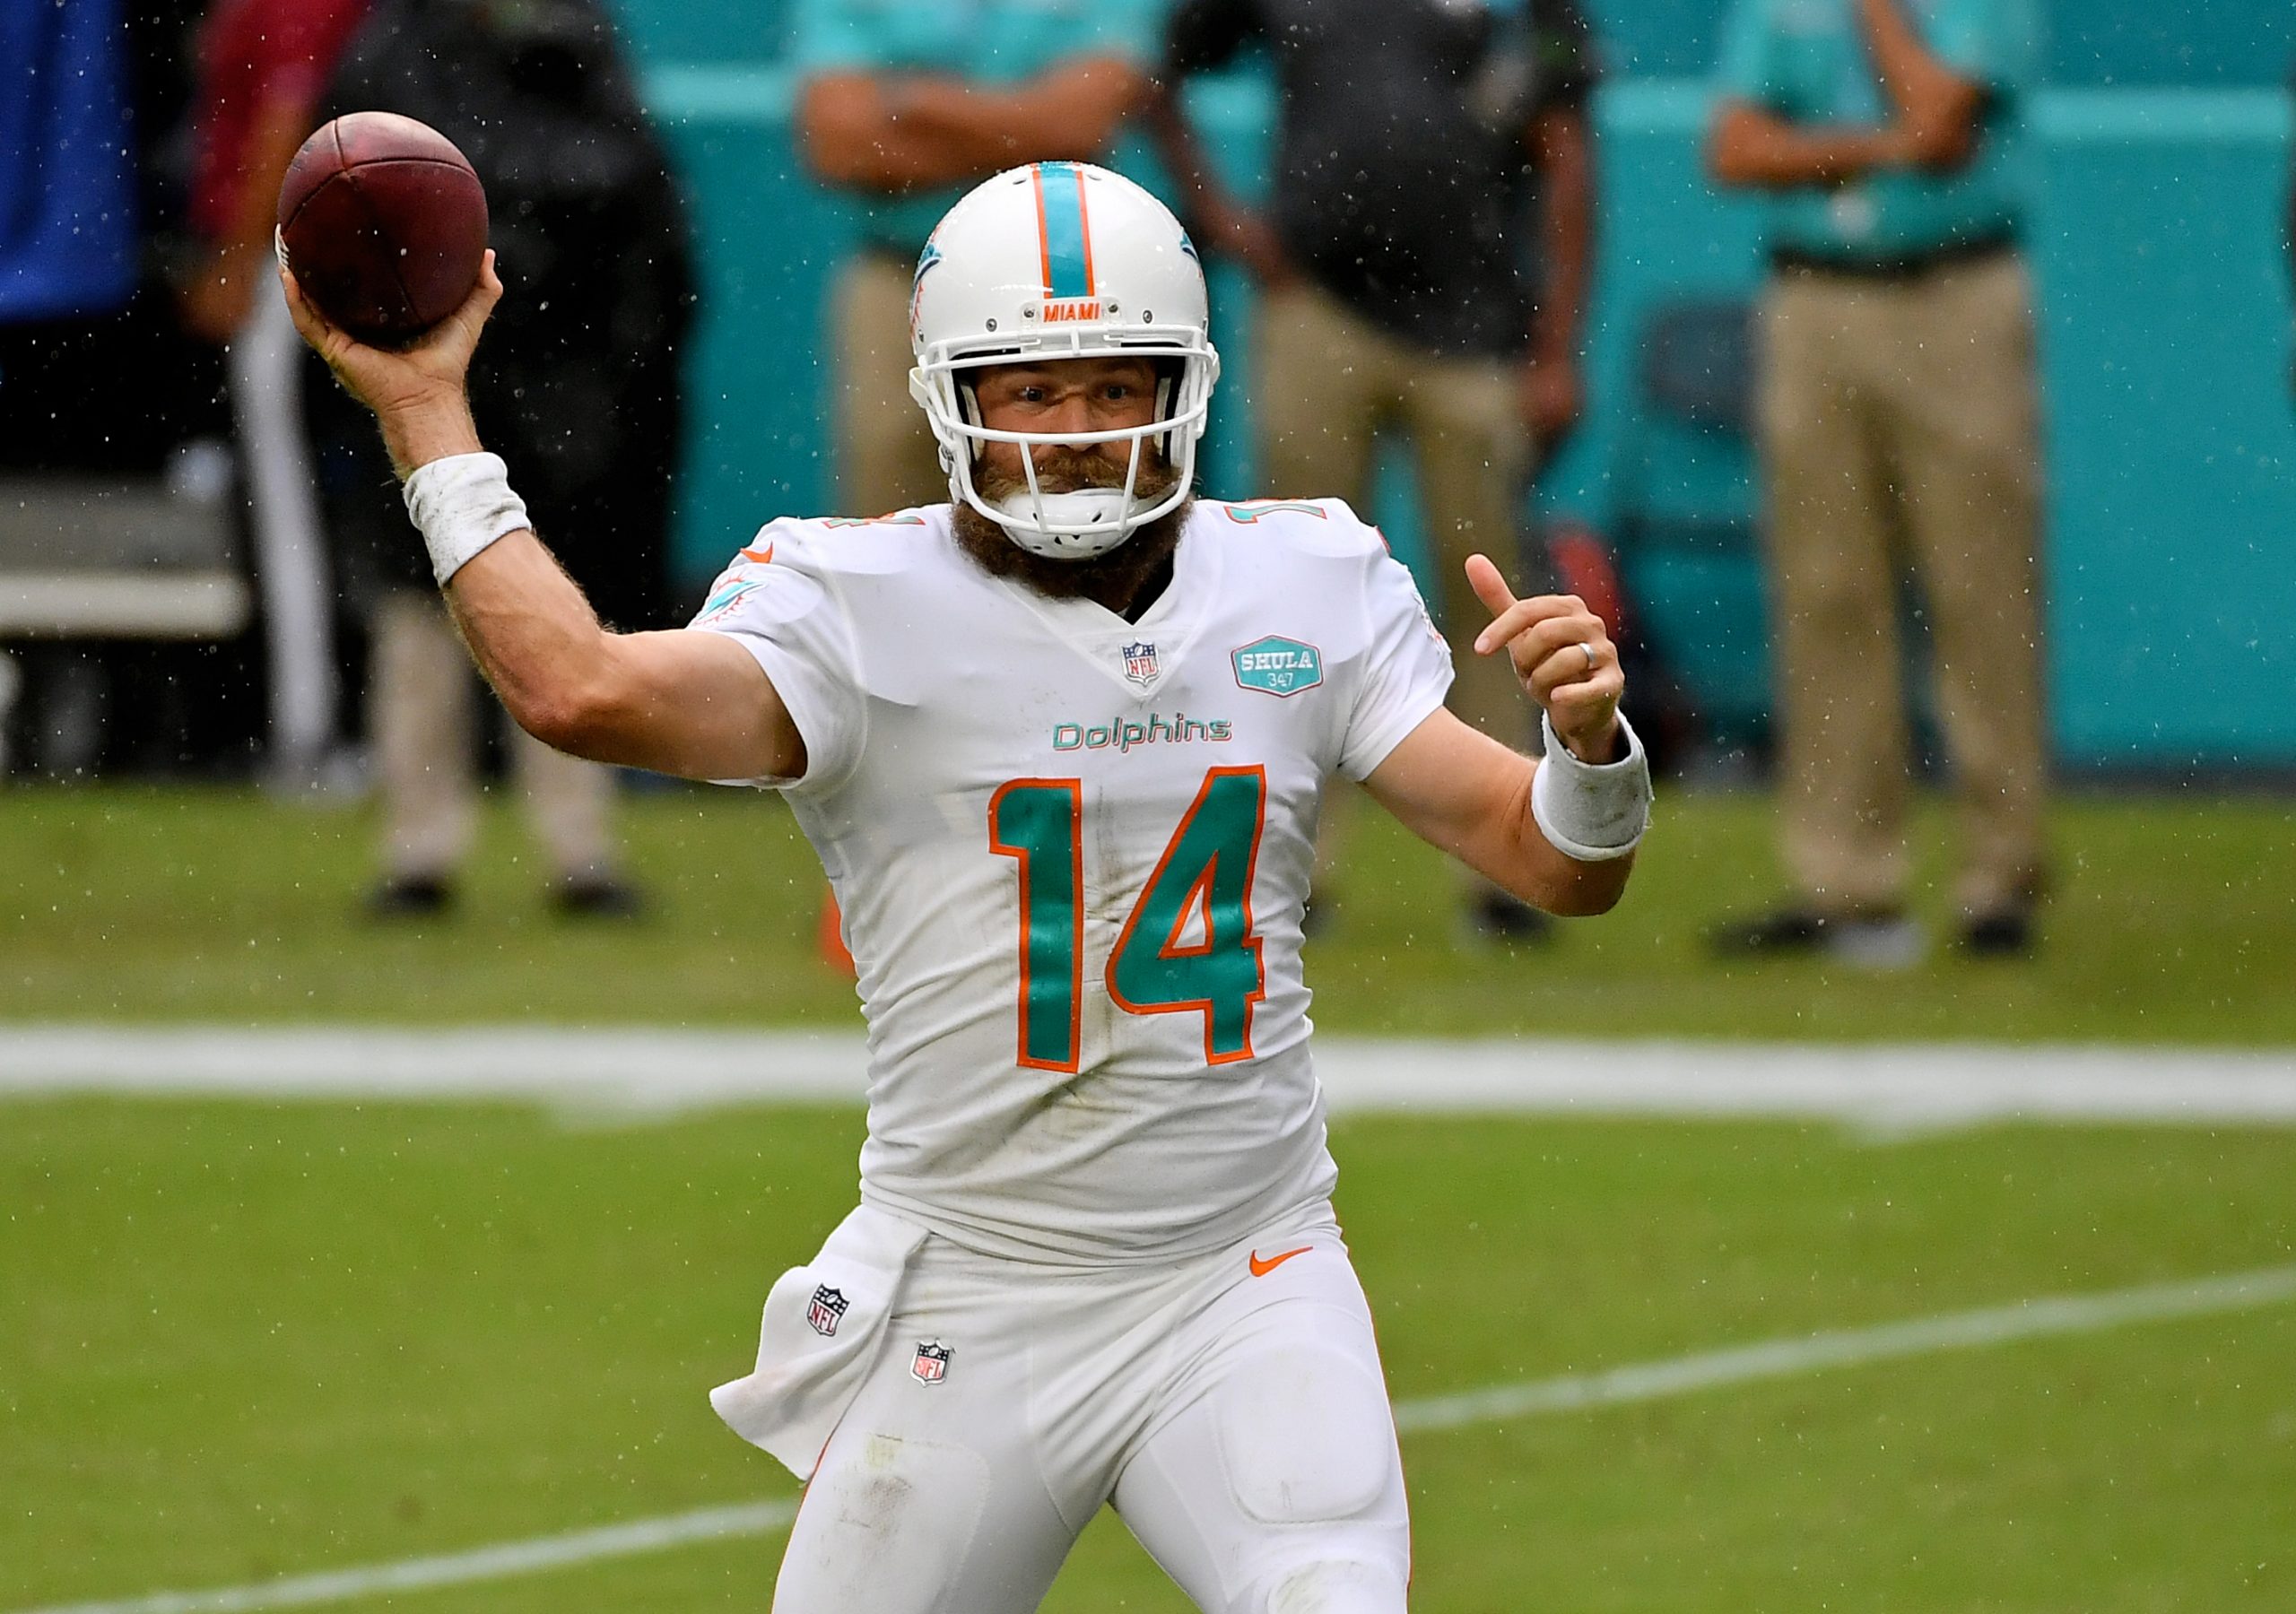 NFL: New York Jets at Miami Dolphins